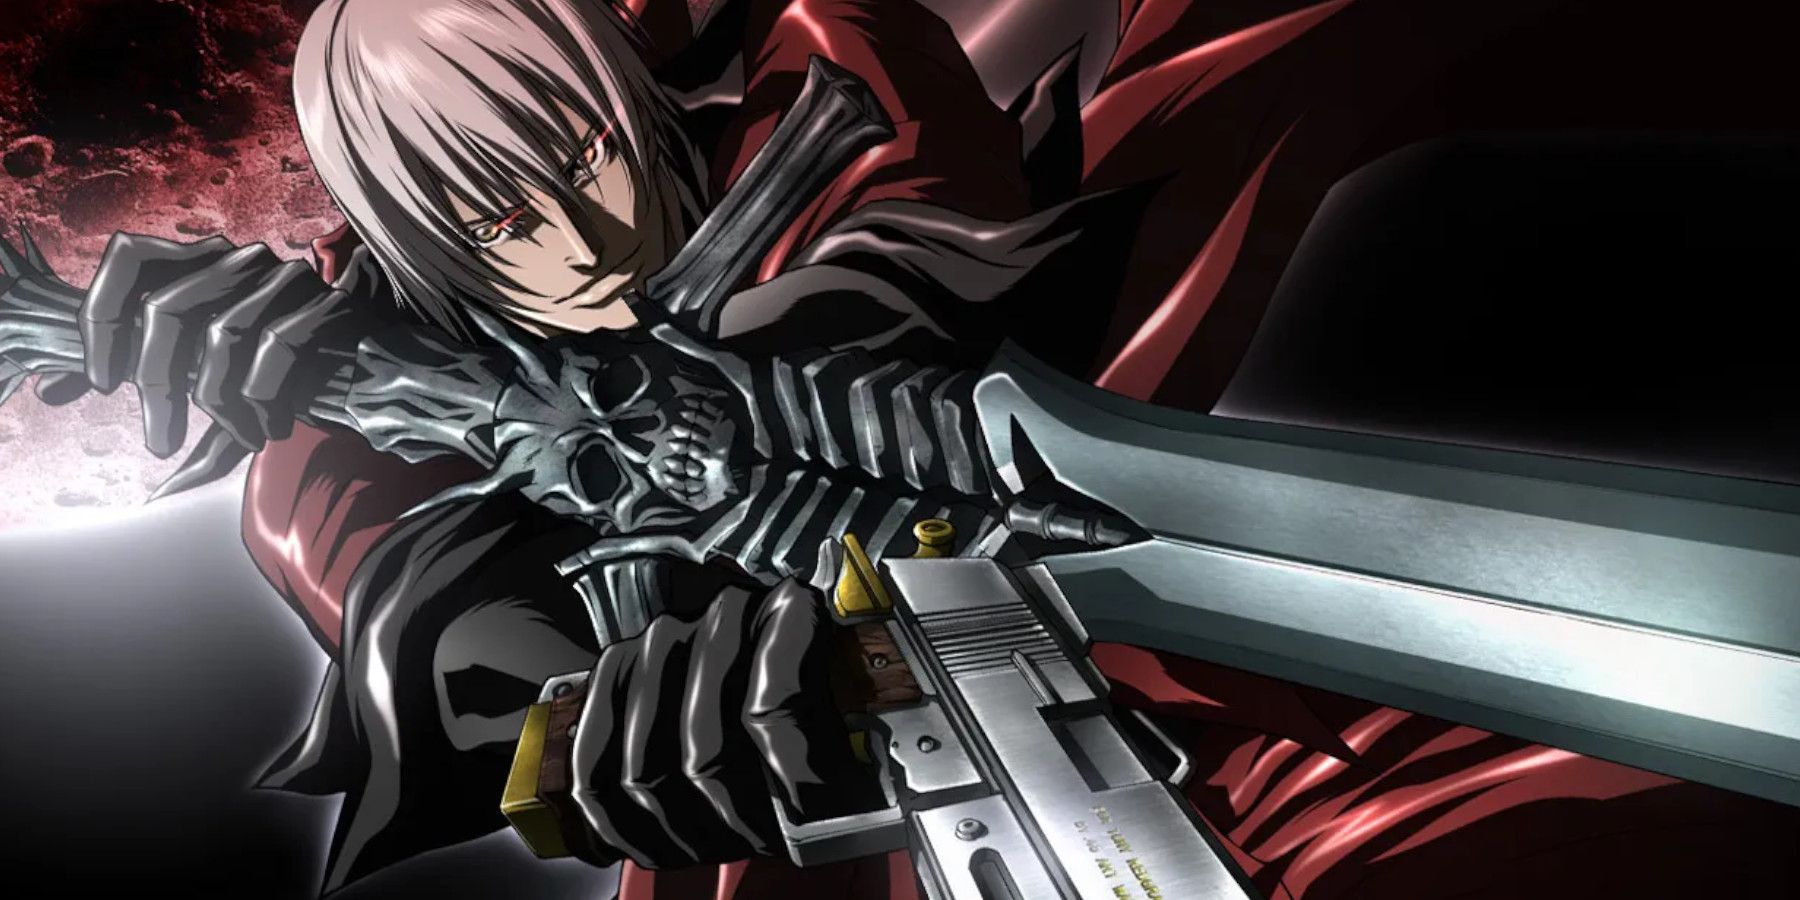  Dante wields a sword and gun in a promo image for Devil May Cry 2007